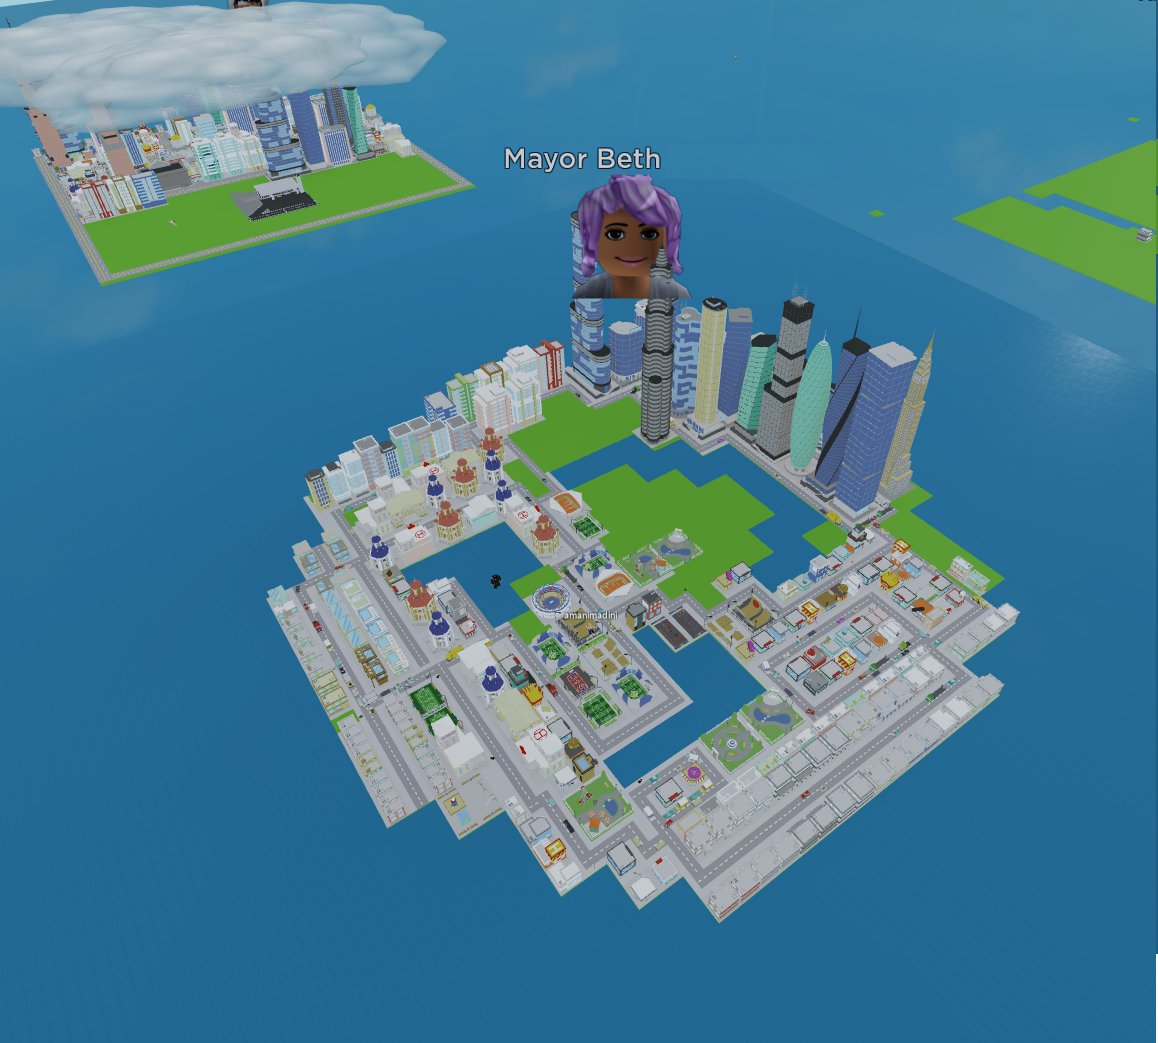 Great Scott Gaming On Twitter Wow Check Out Beth S City Just Found It And I Was Very Impressed Roblox Robloxdev Game Https T Co 2h9bp9vjpq Https T Co Cutmixie9e - town mayor in roblox